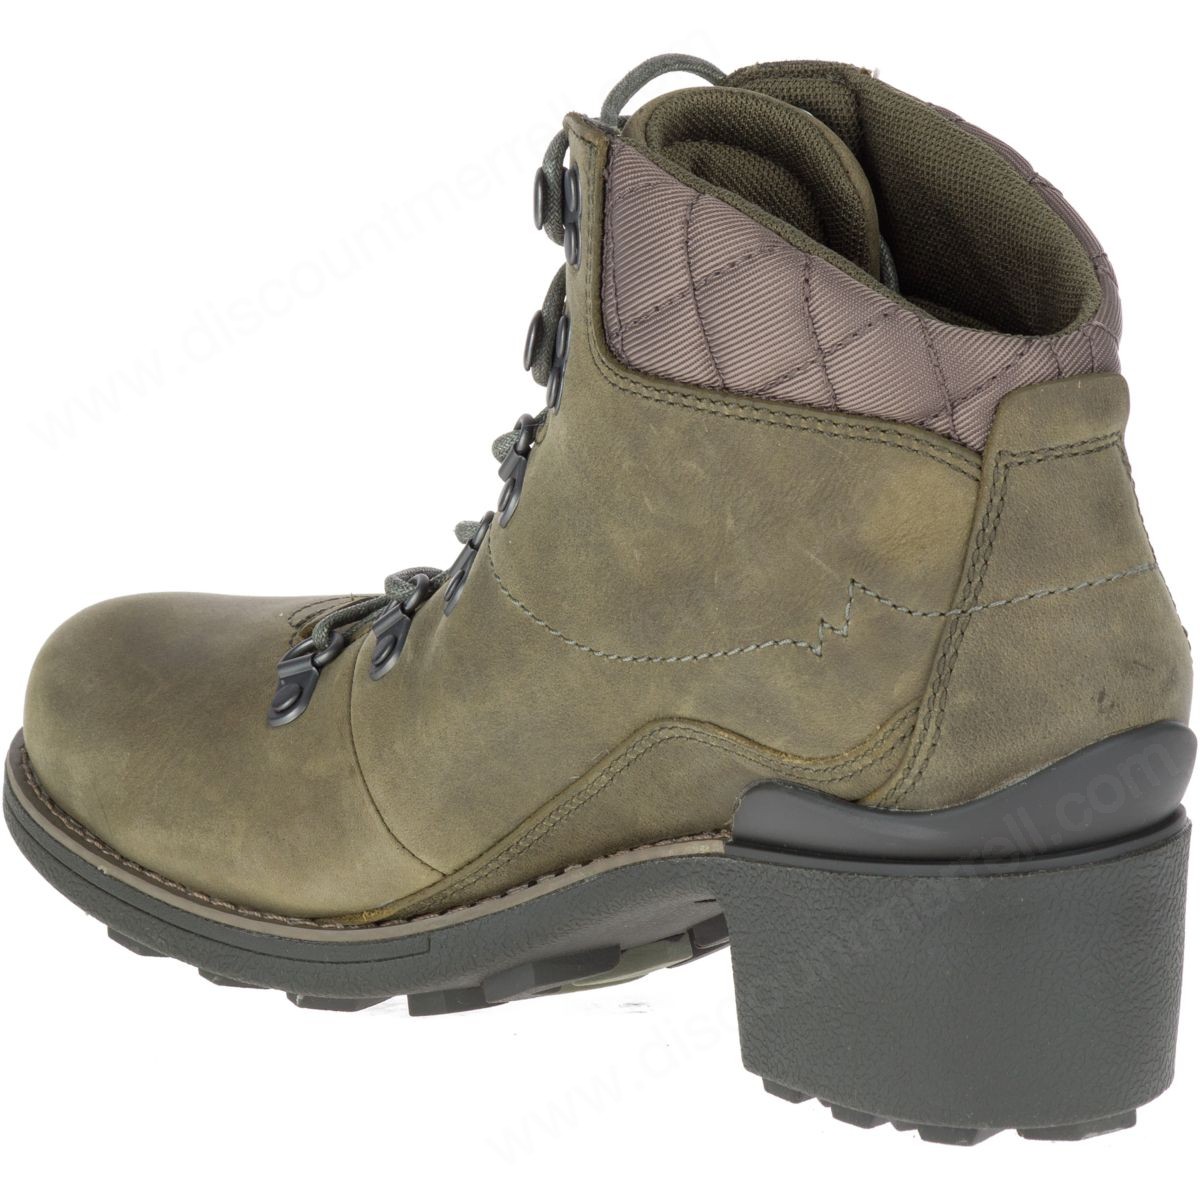 Merrell Woman's Chateau Mid Lace Waterproof Dusty Olive - -6